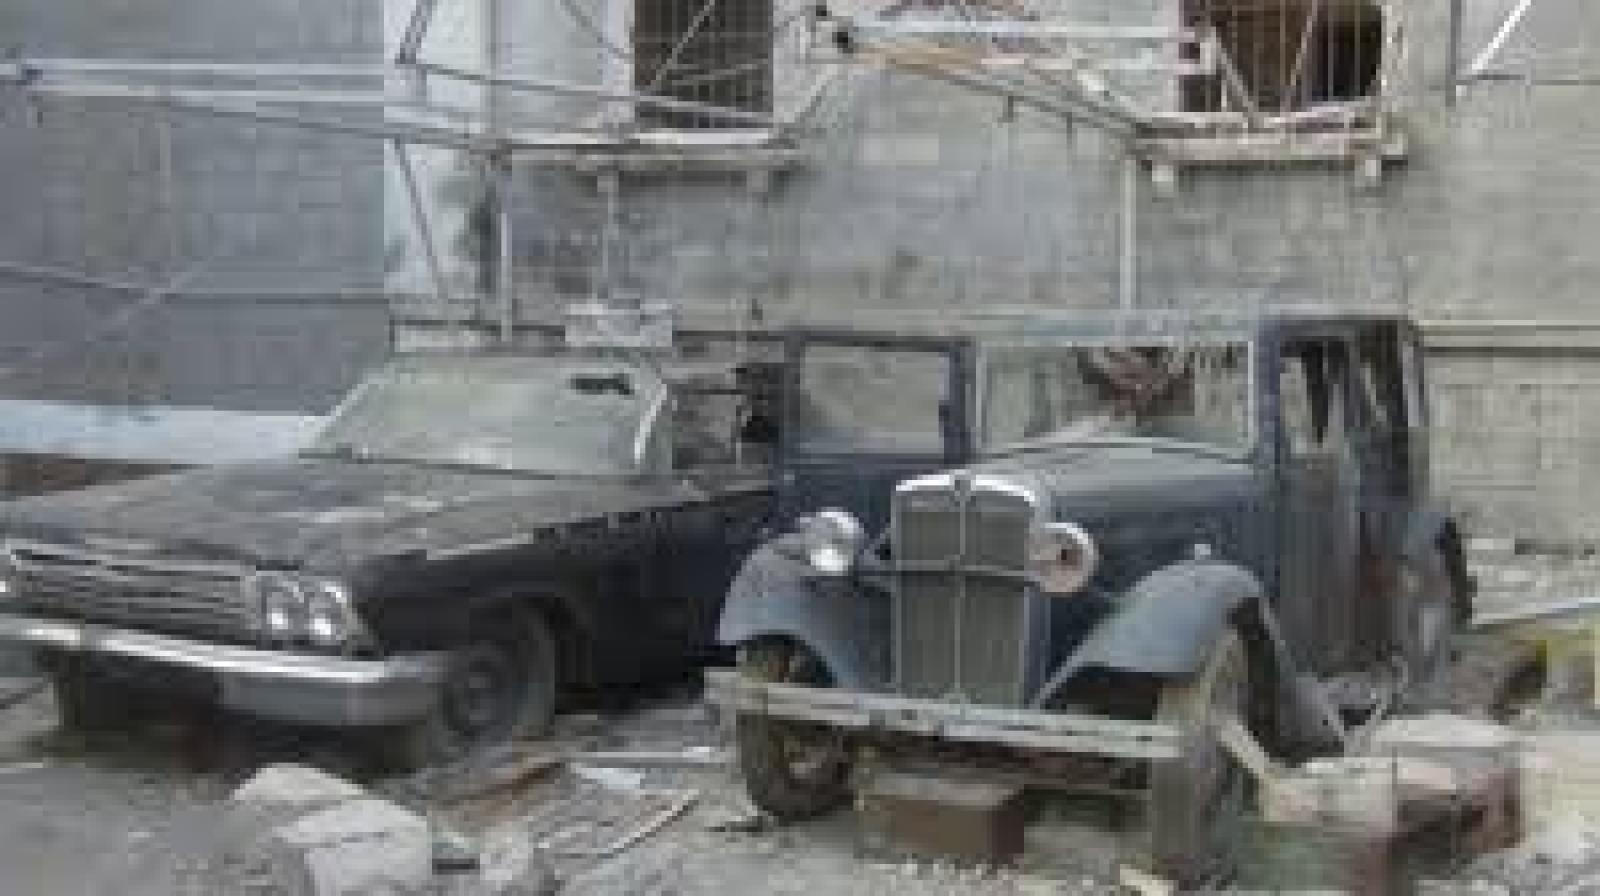 Artifacts of Military Museum in Aden destroyed and looted, Al-Arabi Website